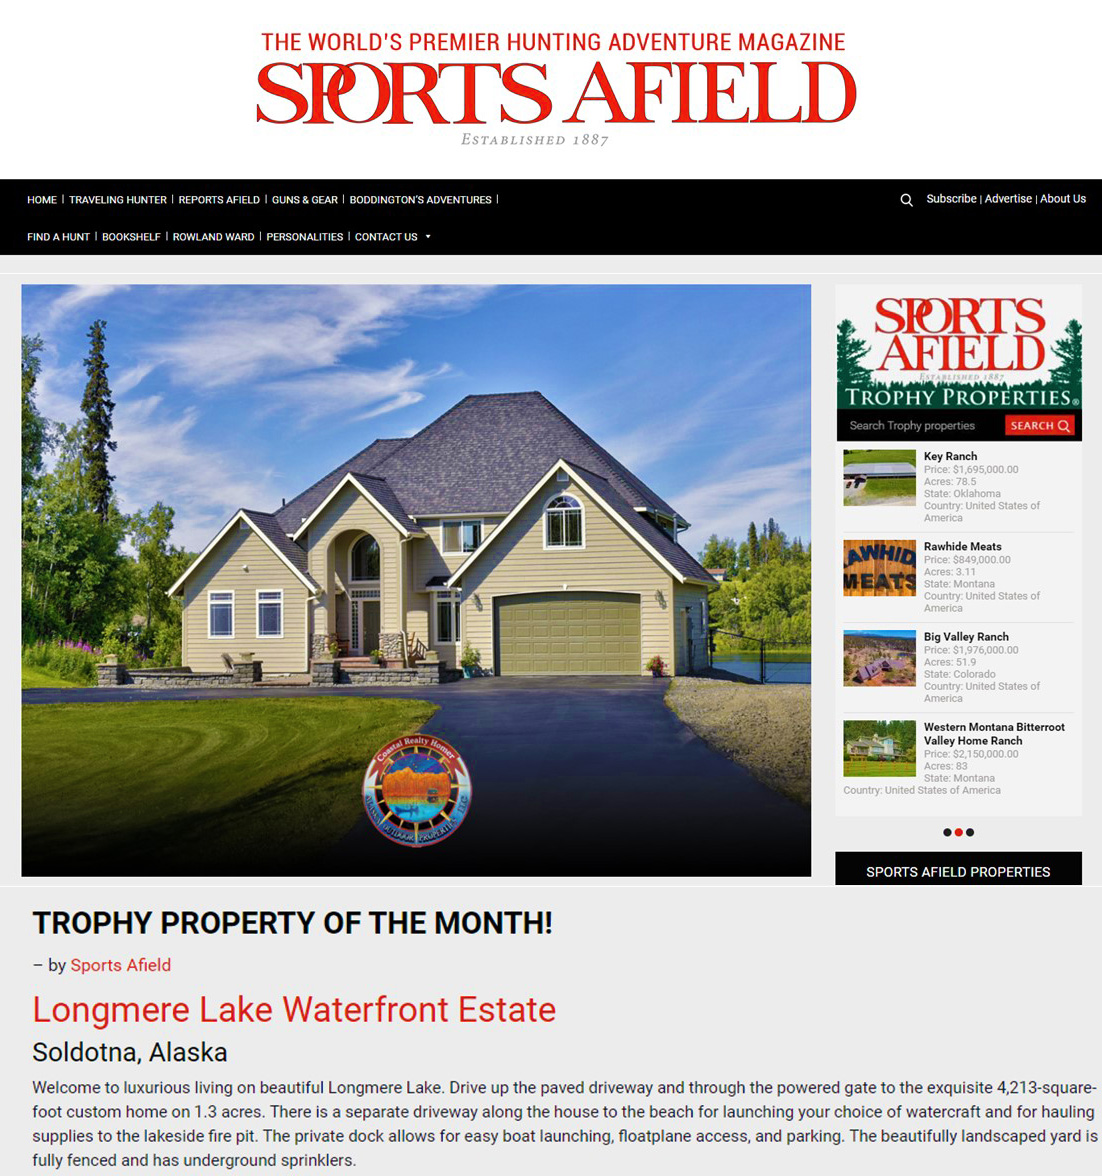 SportsAfield.com Trophy Property of the Month!